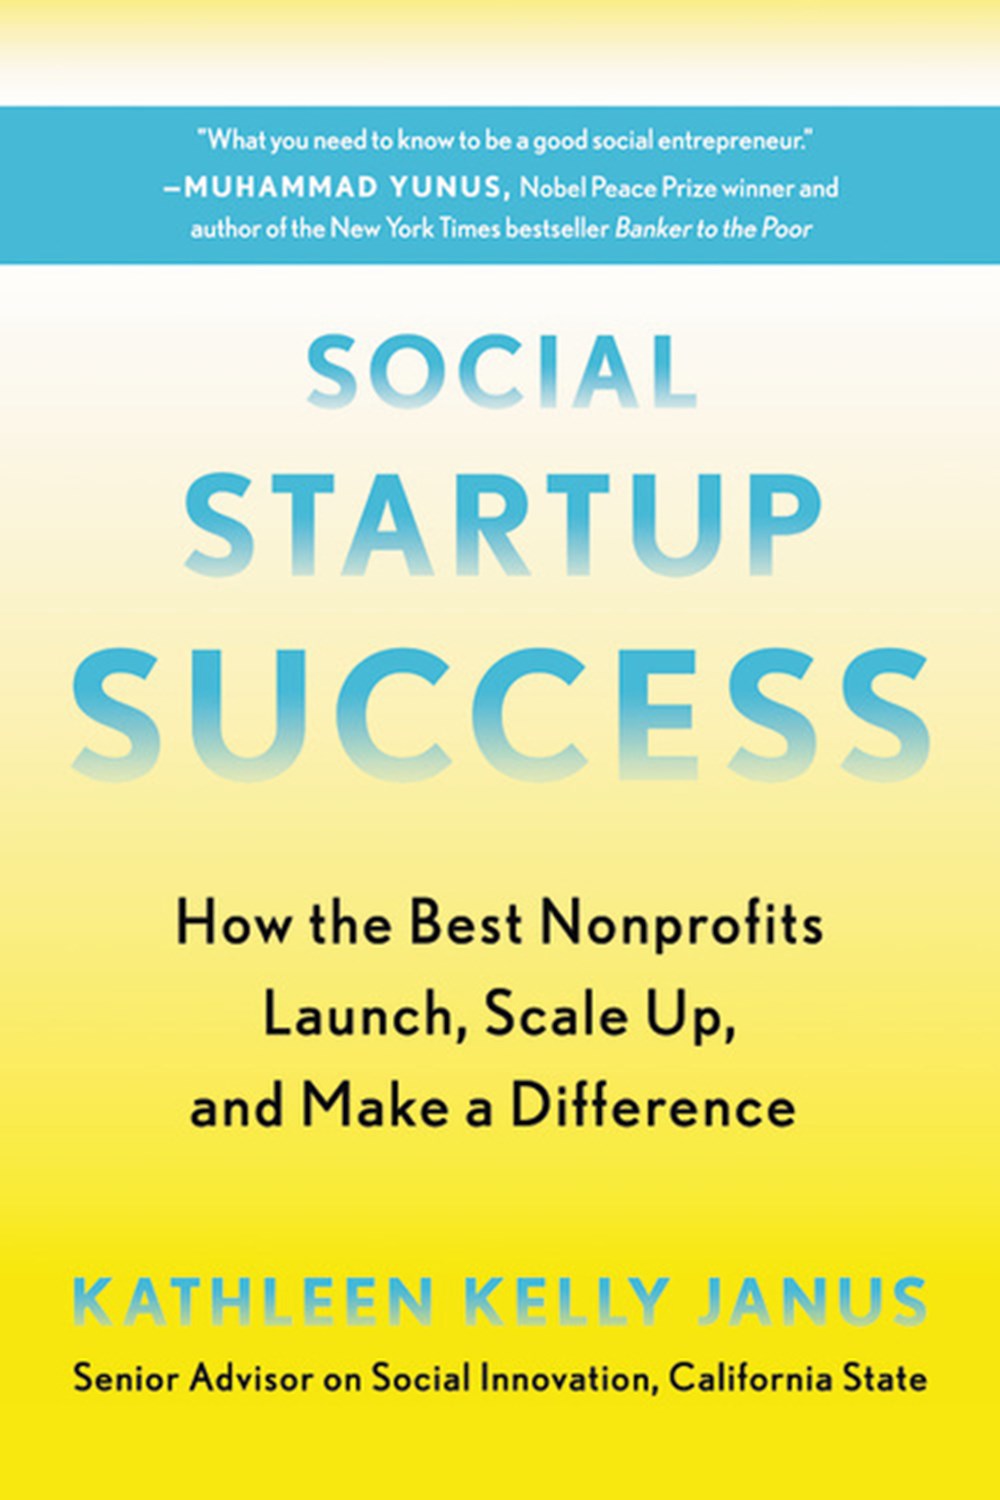 Social Startup Success How the Best Nonprofits Launch, Scale Up, and Make a Difference